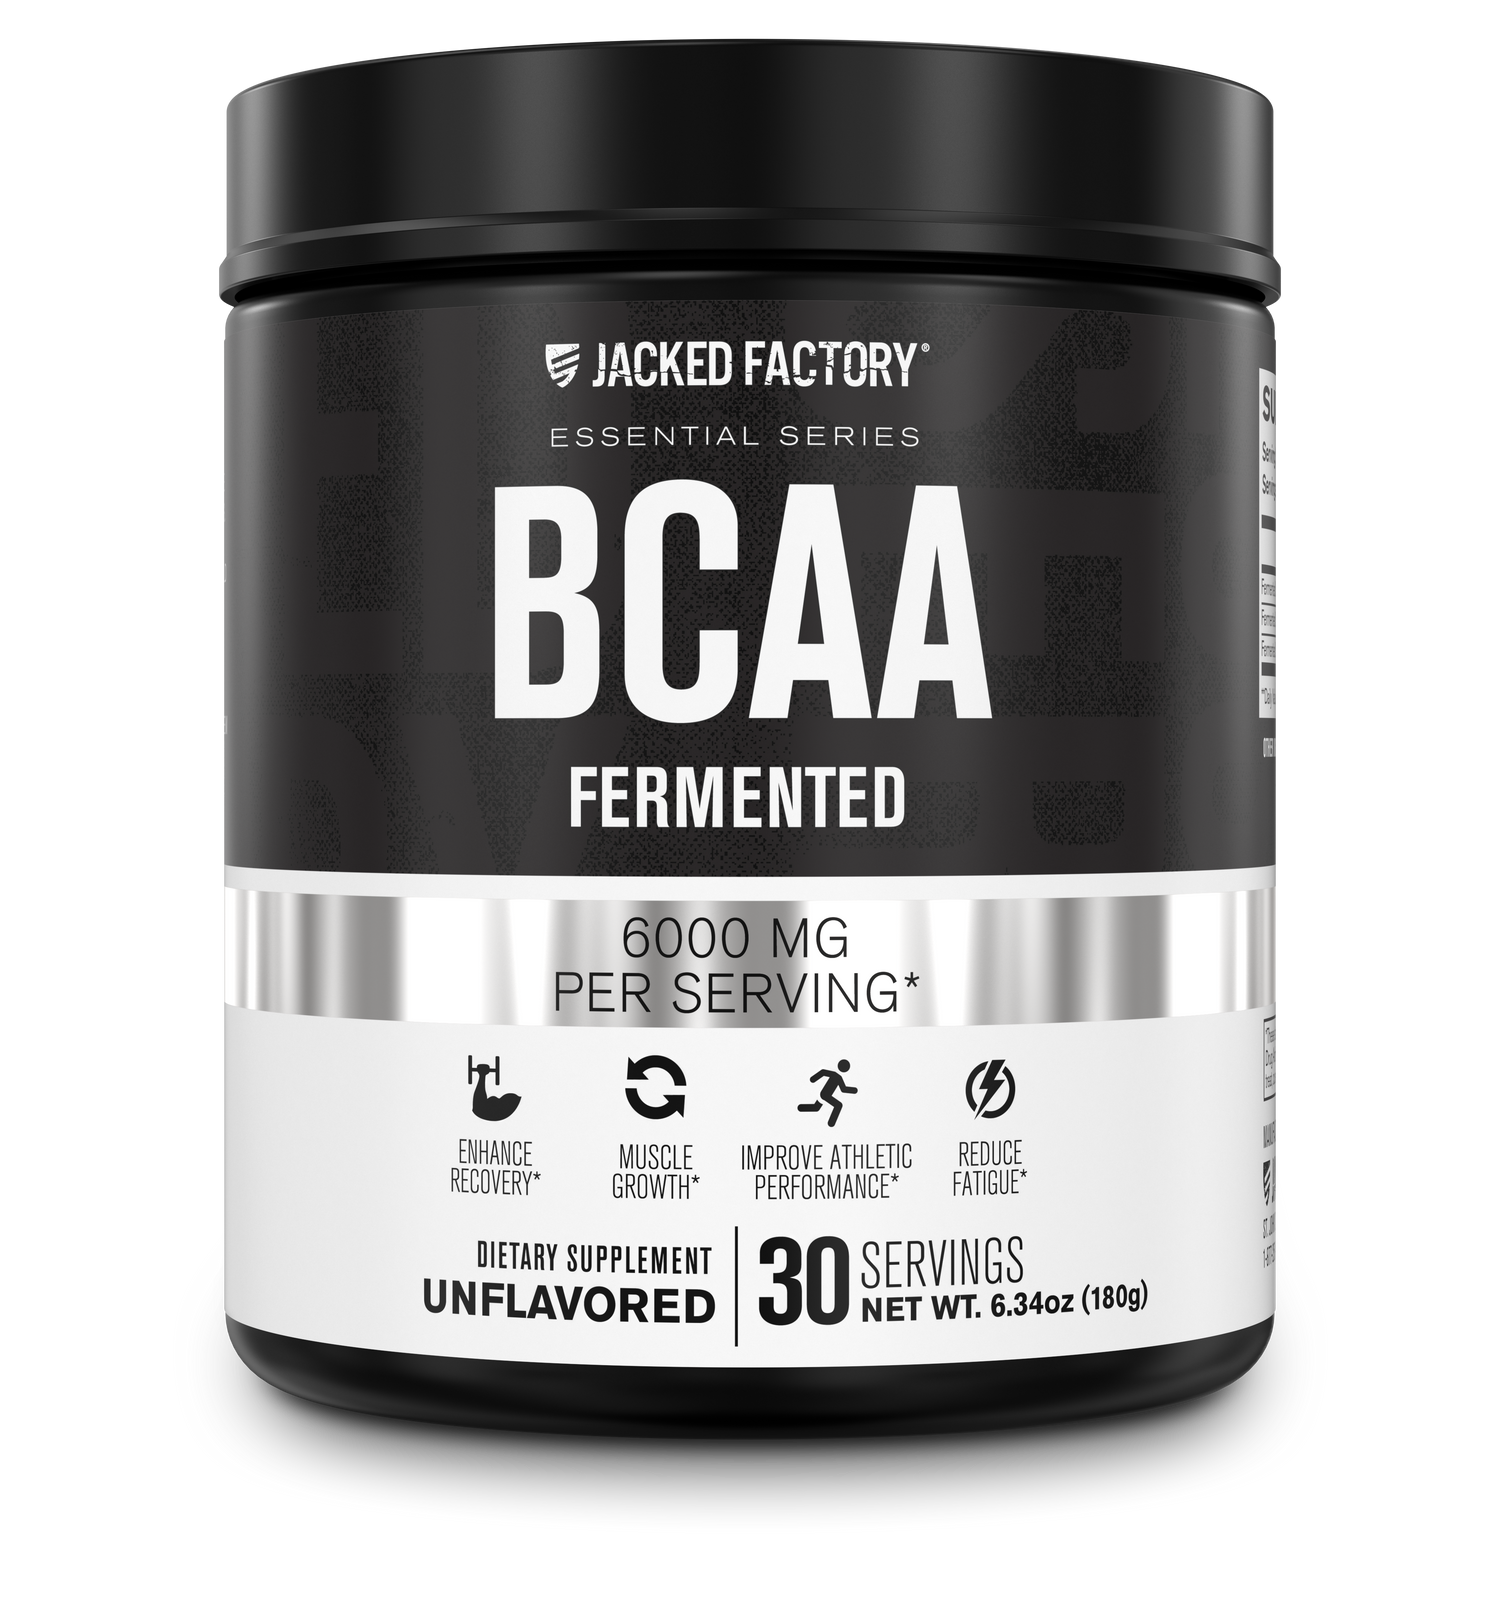 Jacked Factory's 30 servings unflavored BCAA Fermented 6000mg in a black bottle with a white and grey label